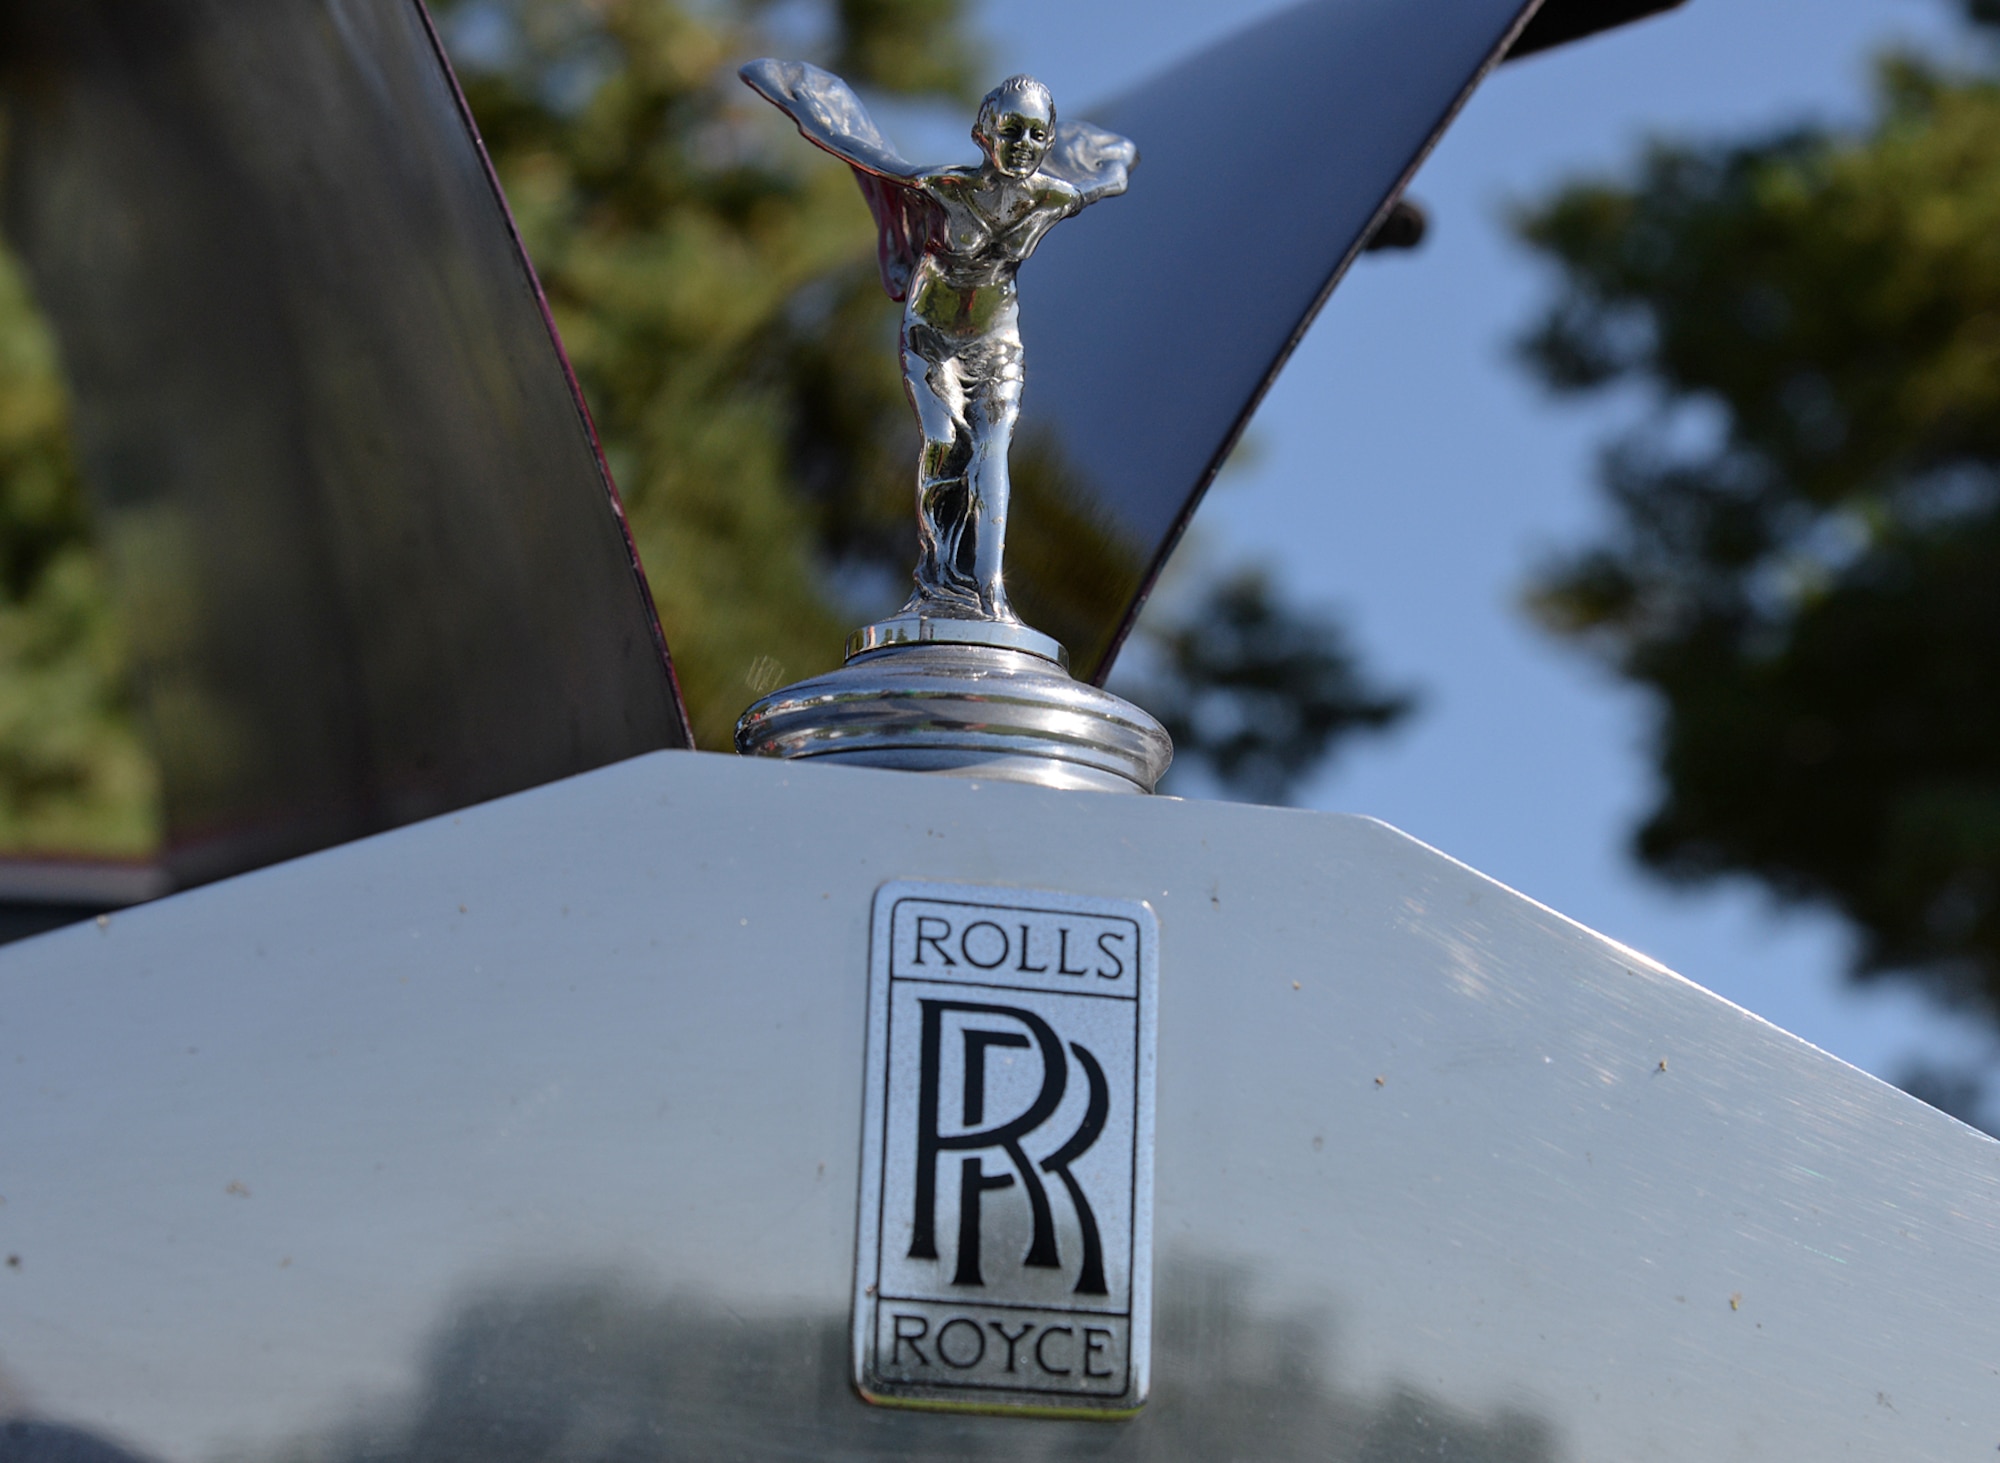 The Spirit of Ecstasy, also called "Emily," "Silver Lady" or "Flying Lady," shines brightly on a 1957 Rolls-Royce owned by Richard Fewkes, 309th Missile Maintenance Group. (U.S. Air Force photo by Alex R. Lloyd)